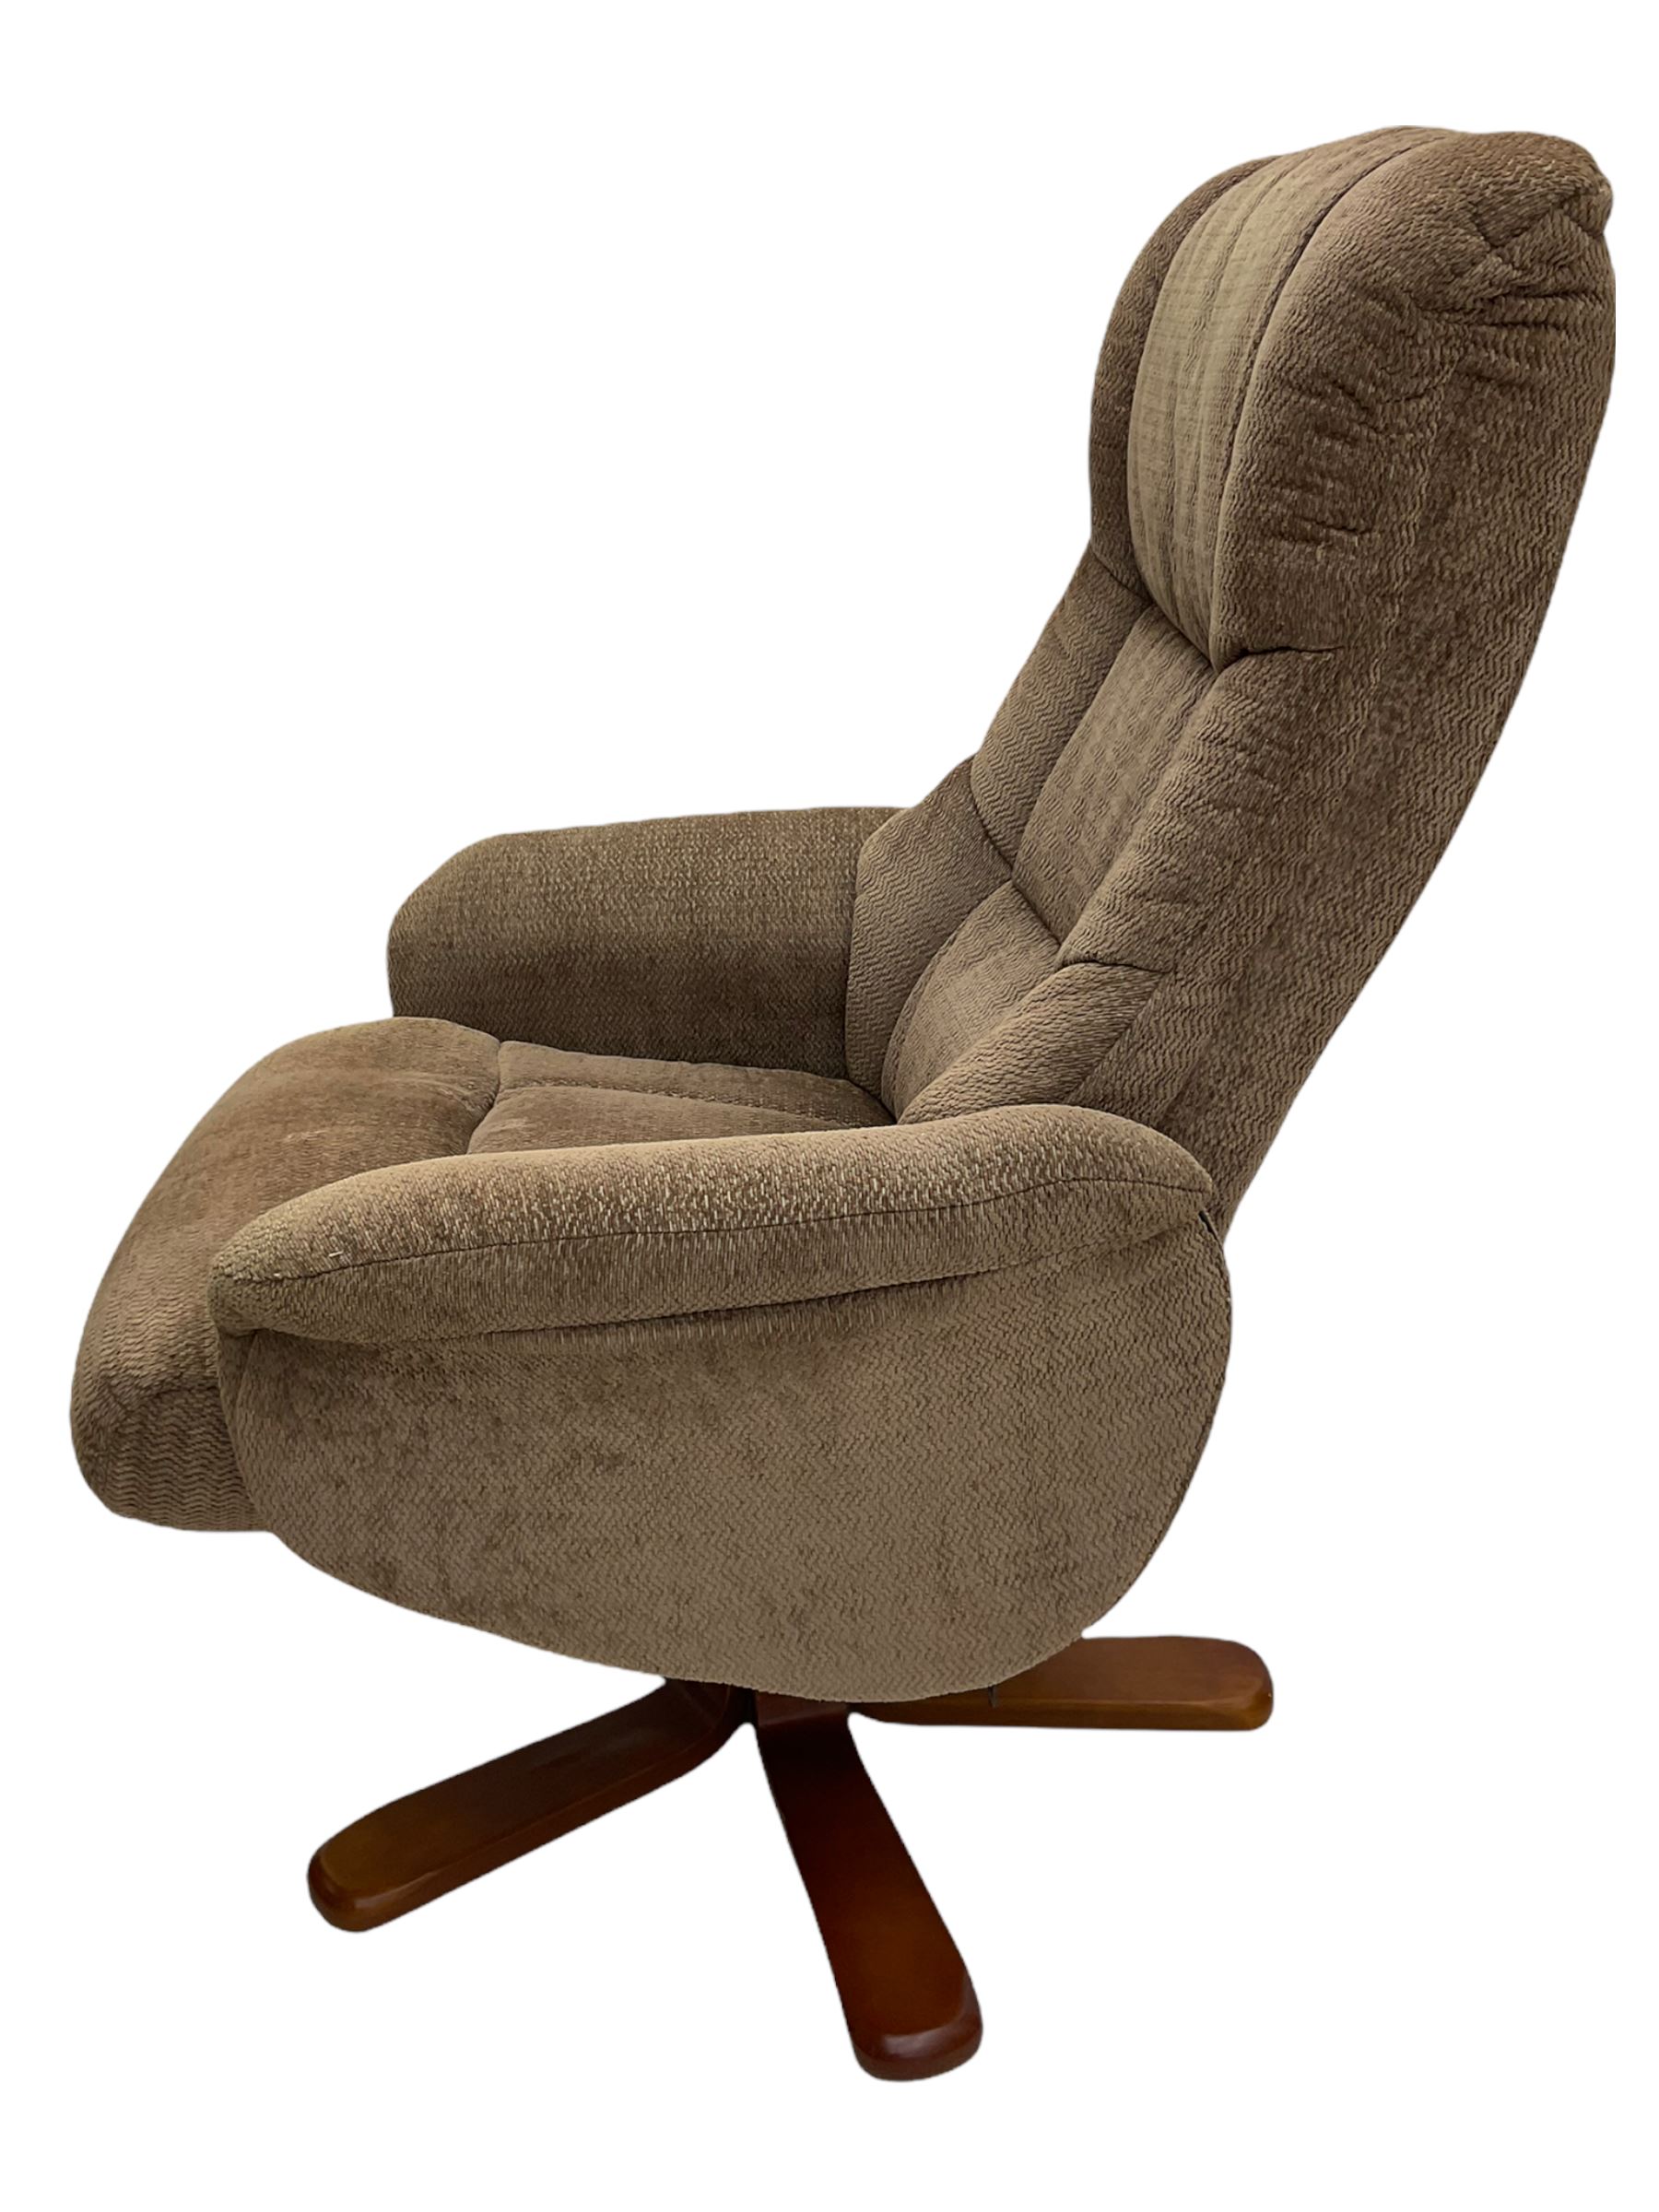 Contemporary lounge chair with matching footstool - Image 6 of 14